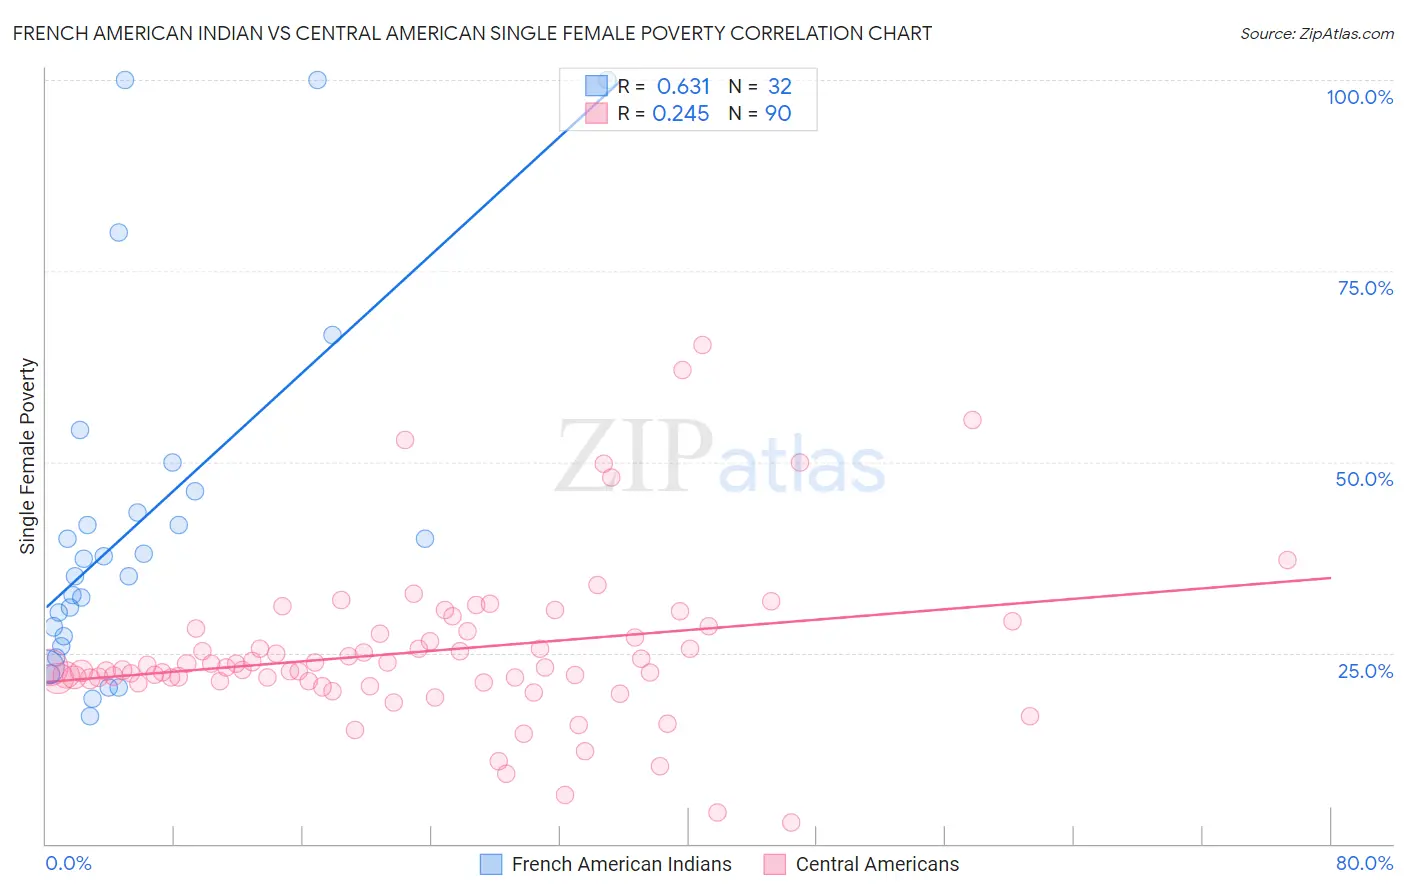 French American Indian vs Central American Single Female Poverty